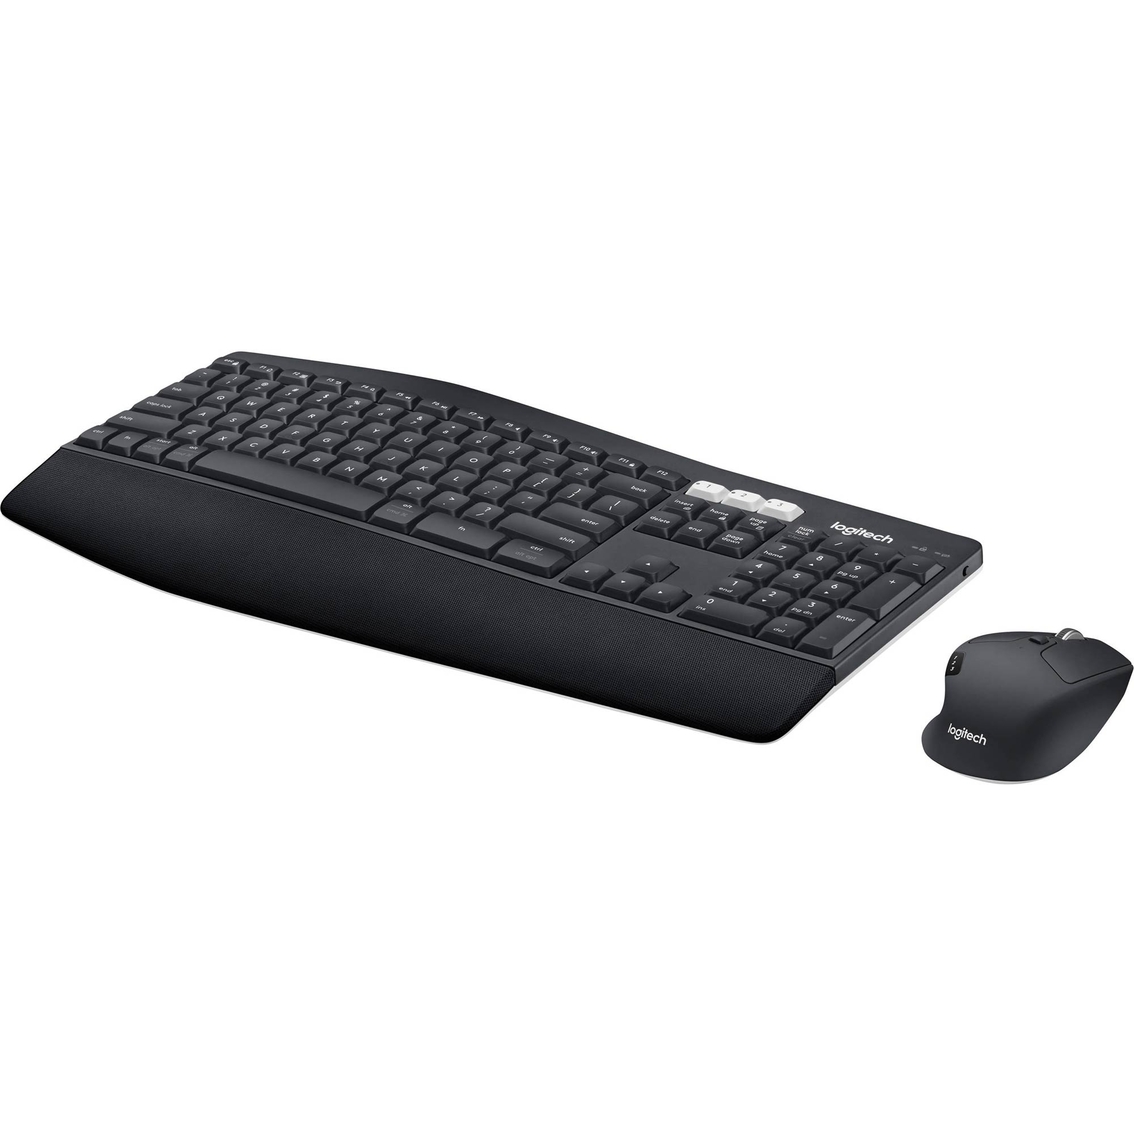 Logitech MK850 Performance Wireless Keyboard and Optical Mouse Combo - Image 2 of 5